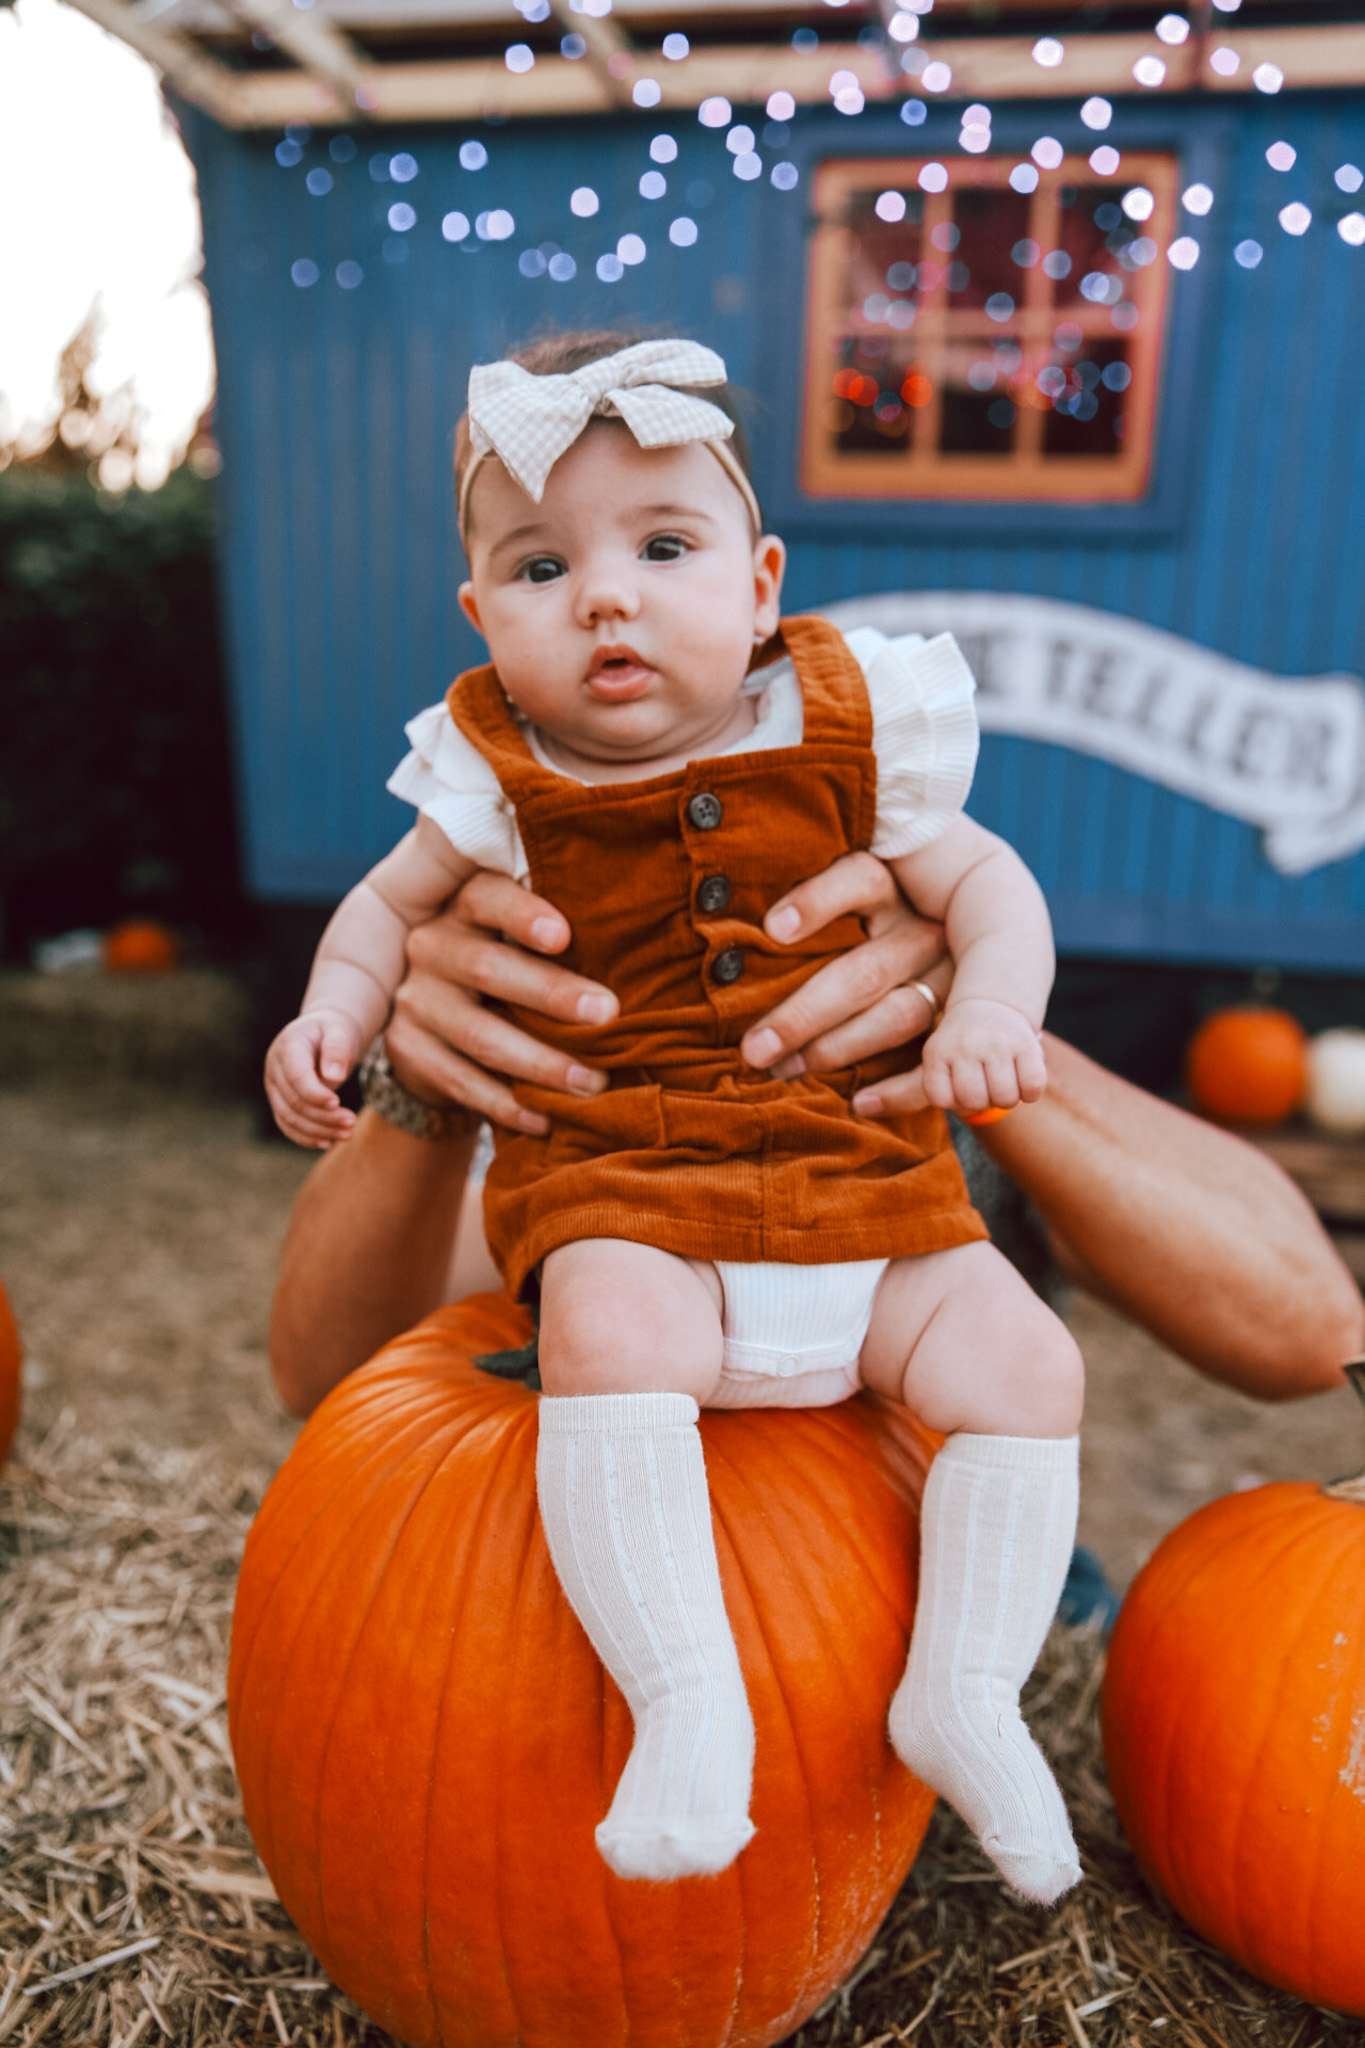 Baby at Pumpkin patch